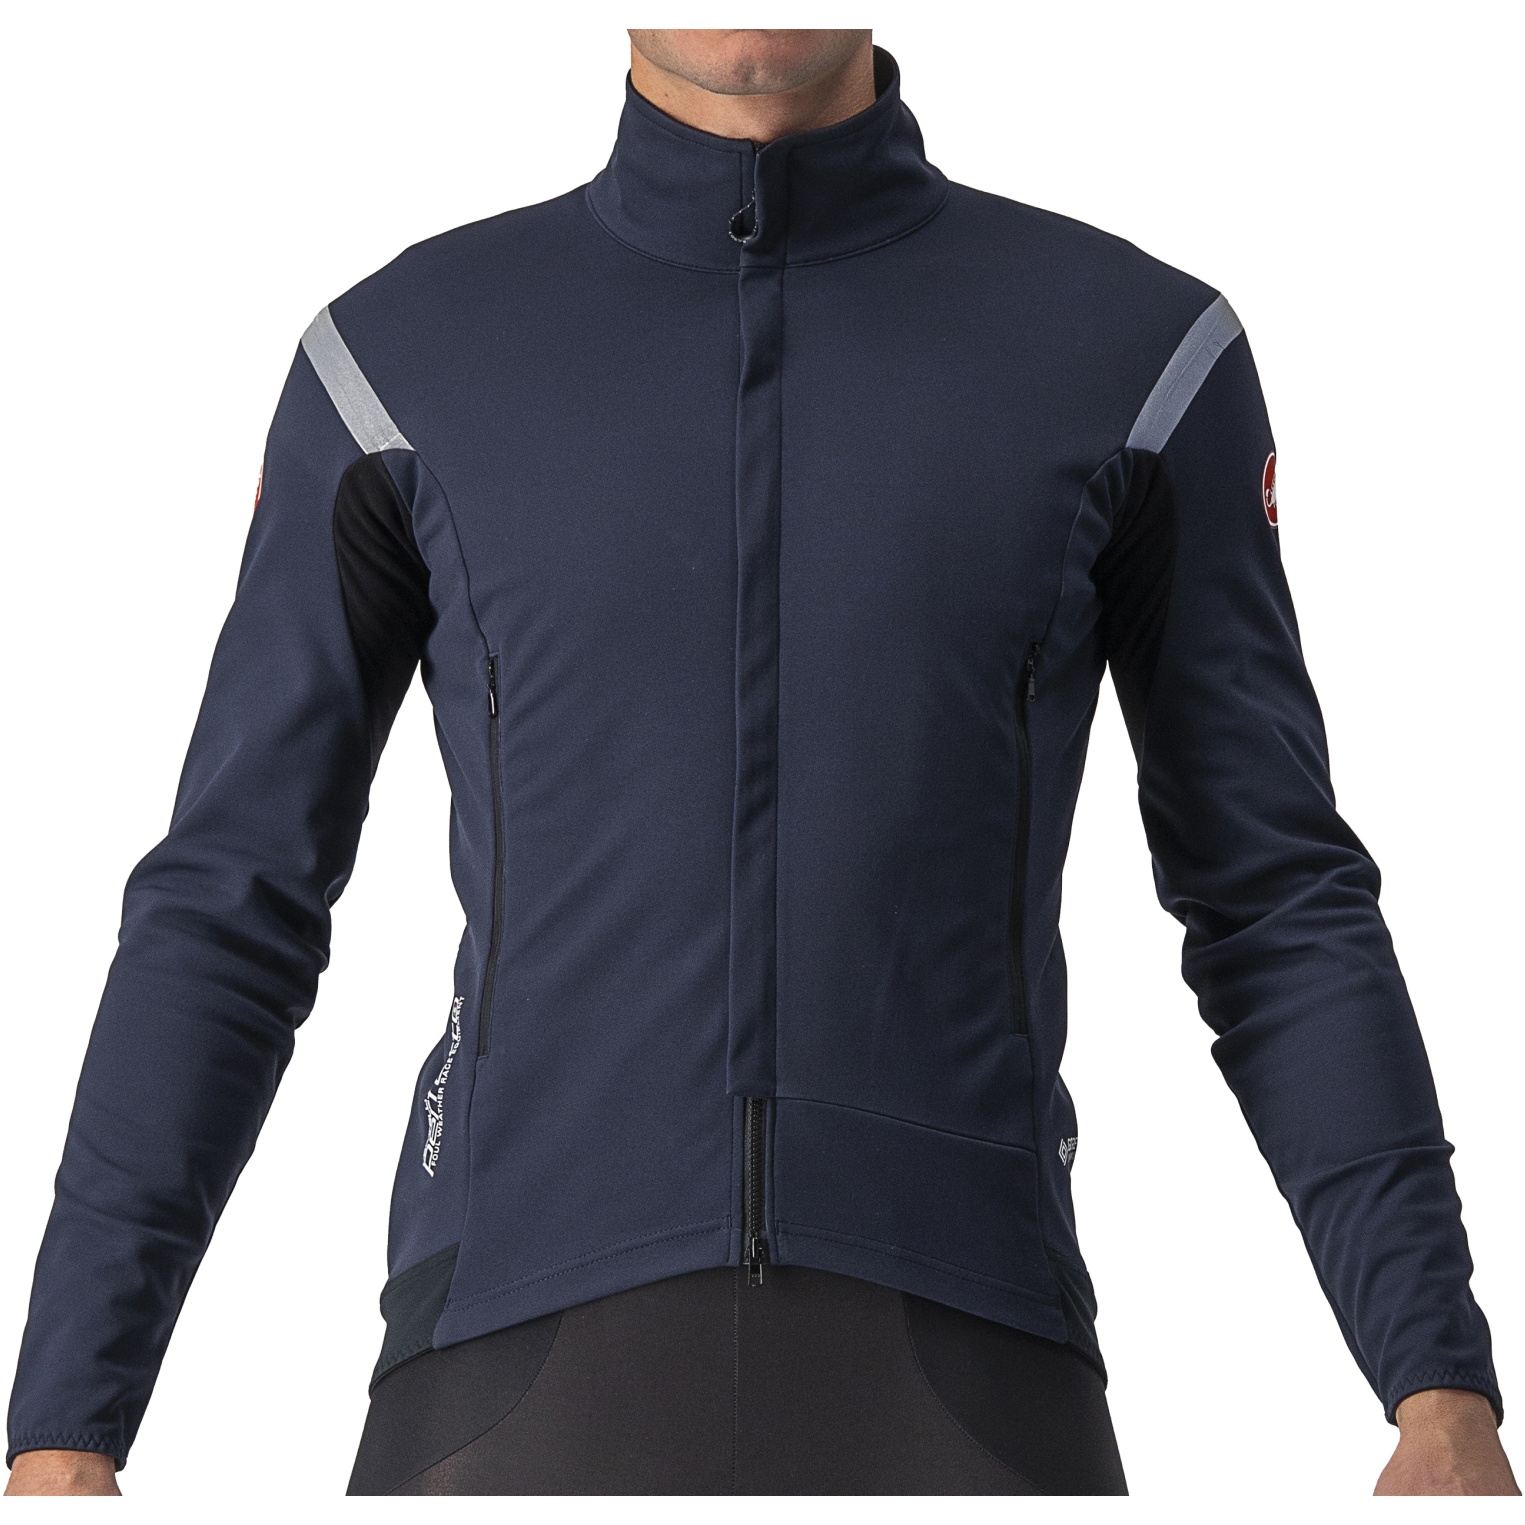 Picture of Castelli Perfetto RoS 2 Jacket - savile blue/silver grey 414